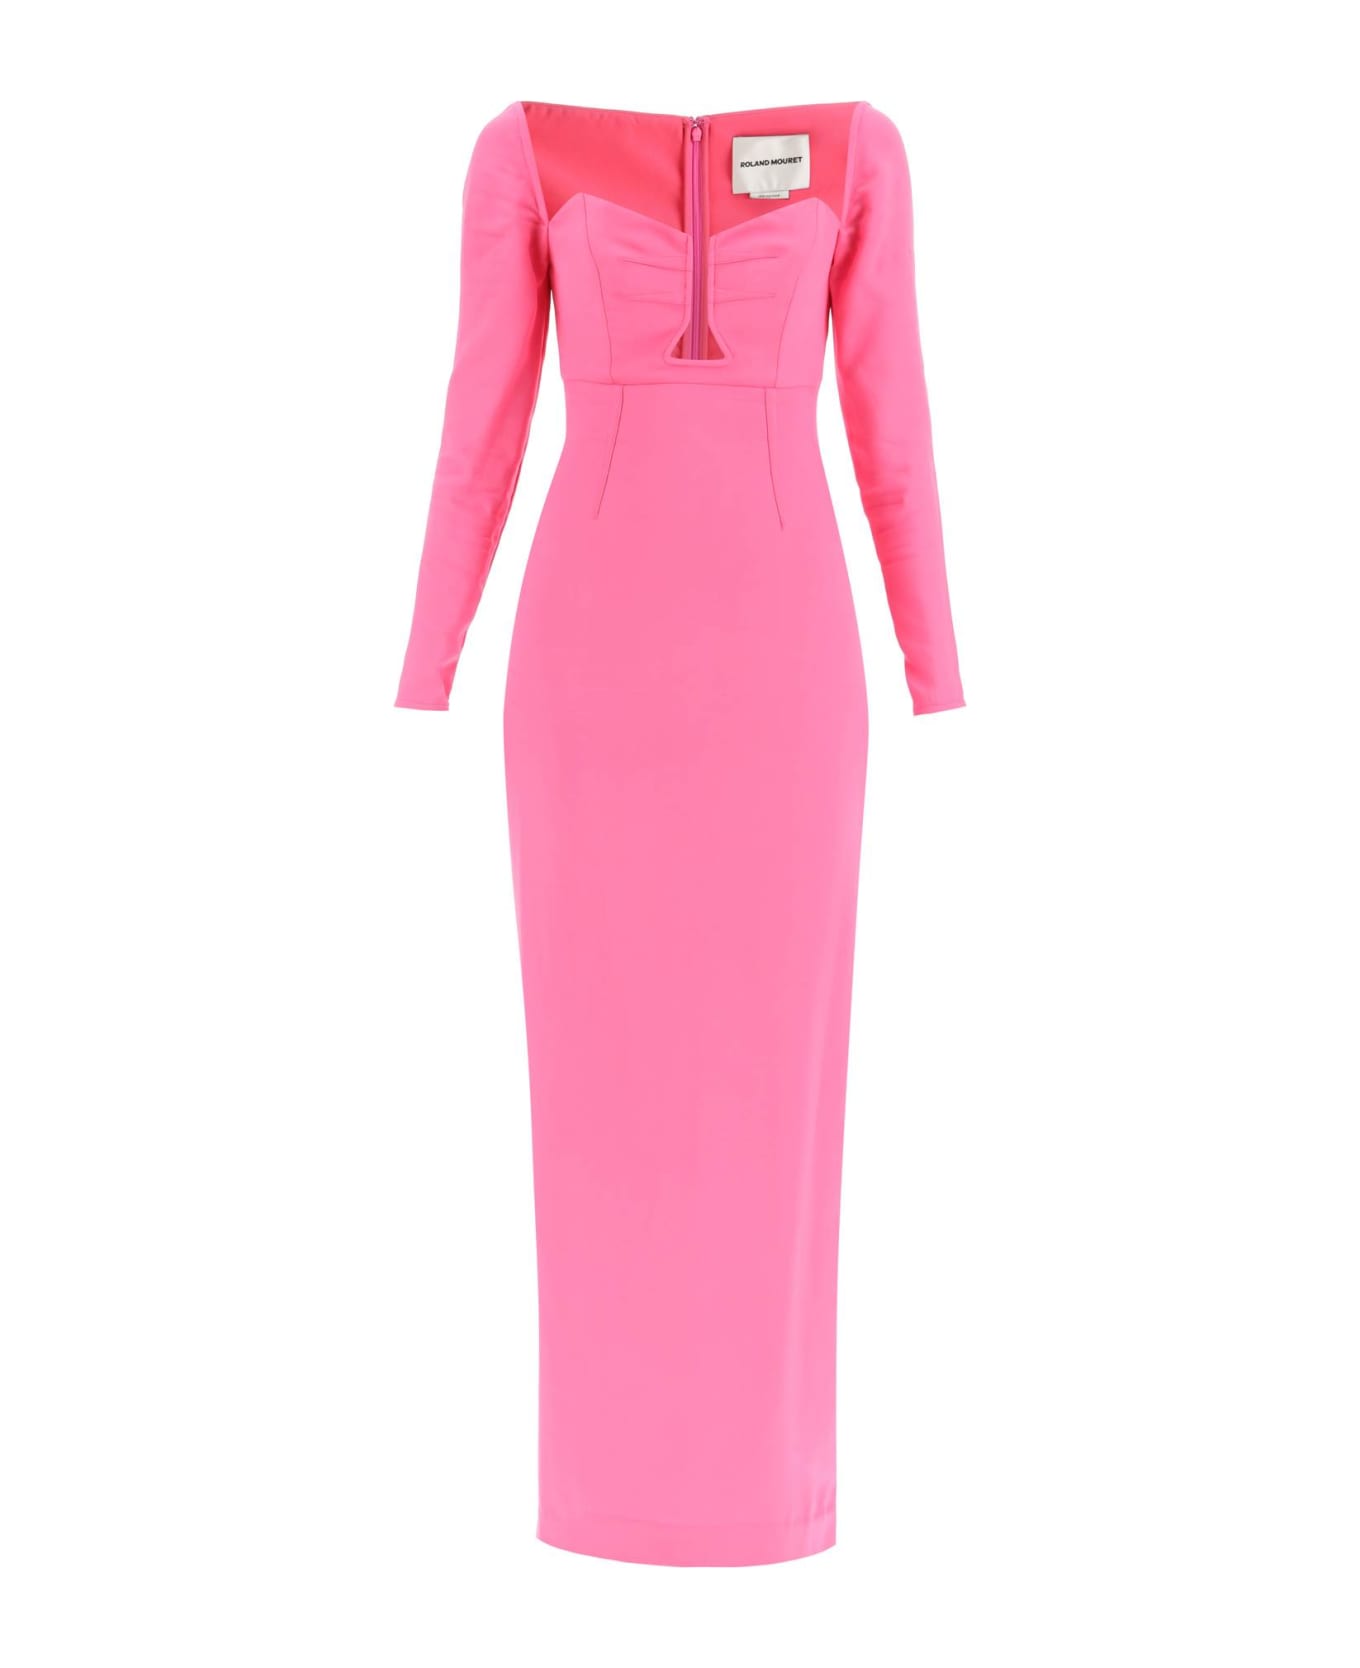 Roland Mouret Maxi Pencil Dress With Cut Outs - PINK (Pink)